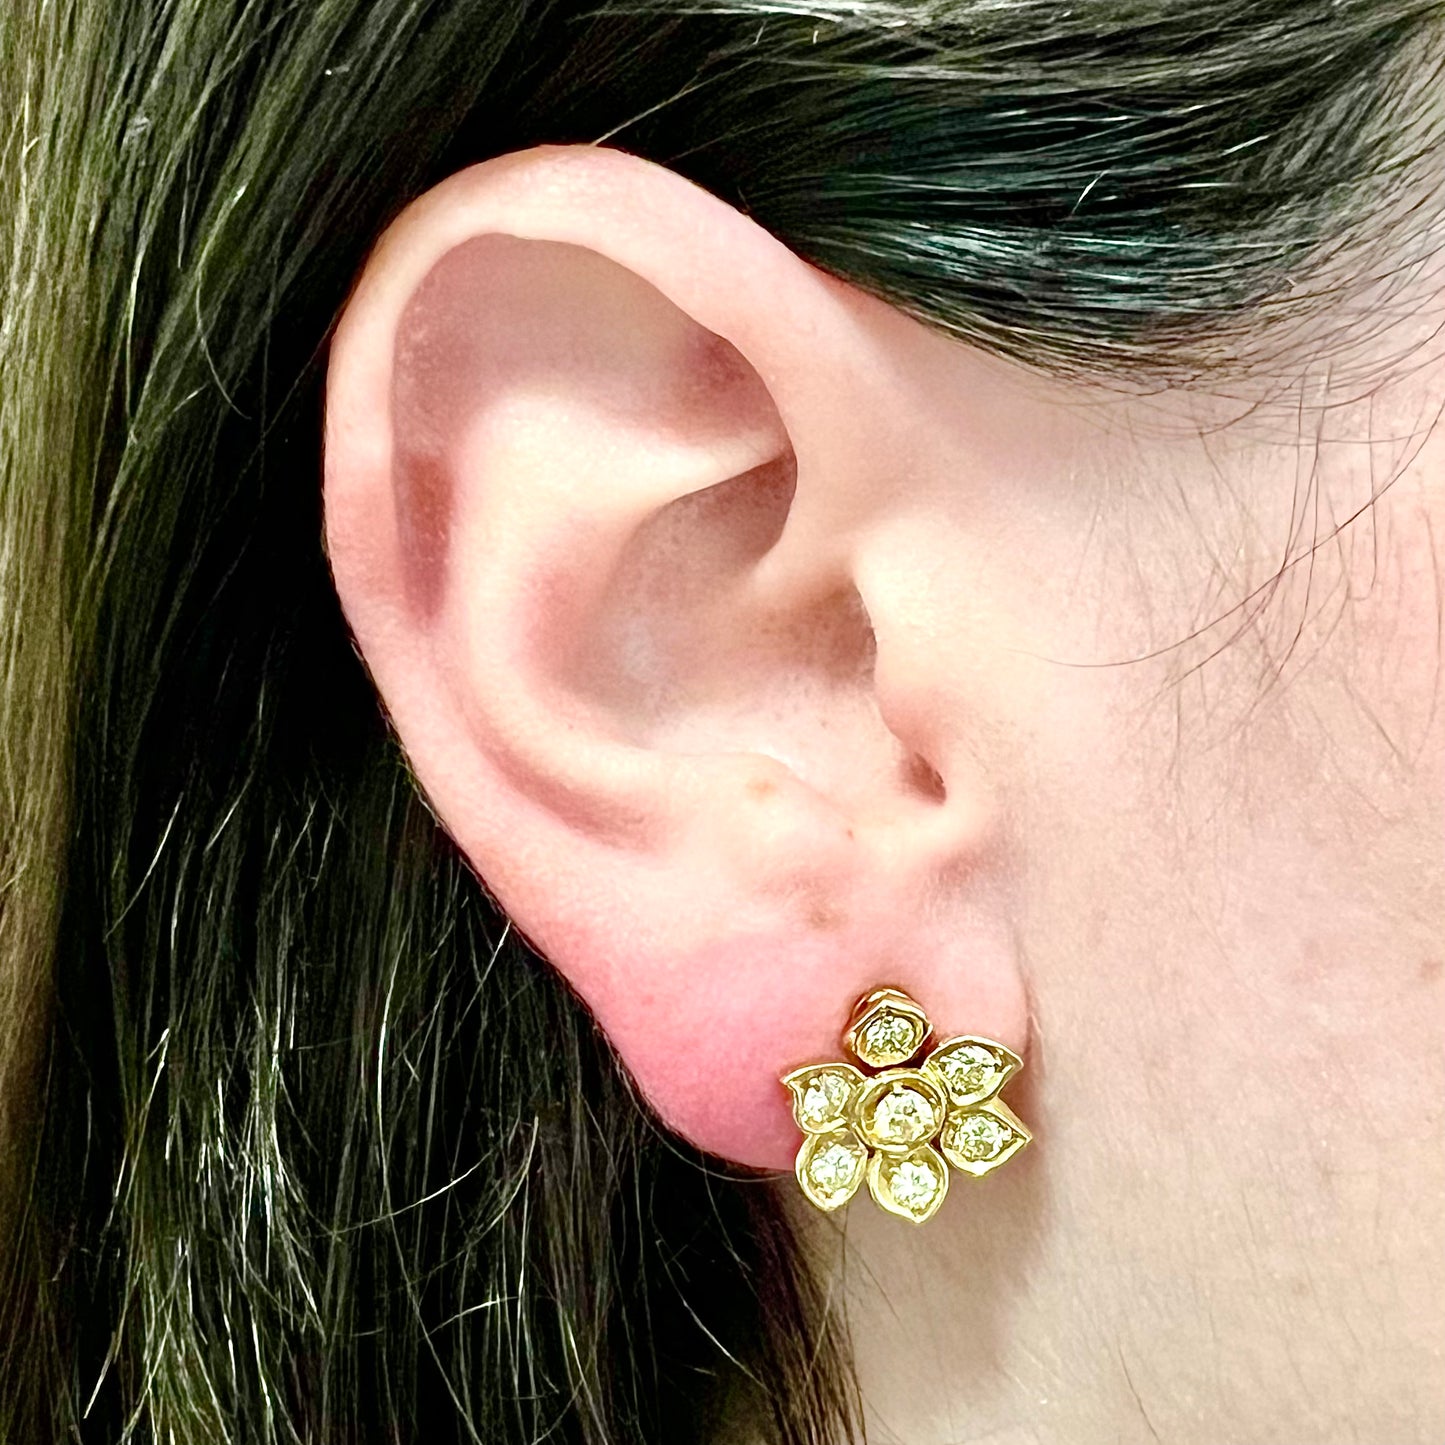 Rare Vintage Handcrafted 18 Karat Yellow Gold Natural Yellow Diamond Flower Earrings By Carvin French